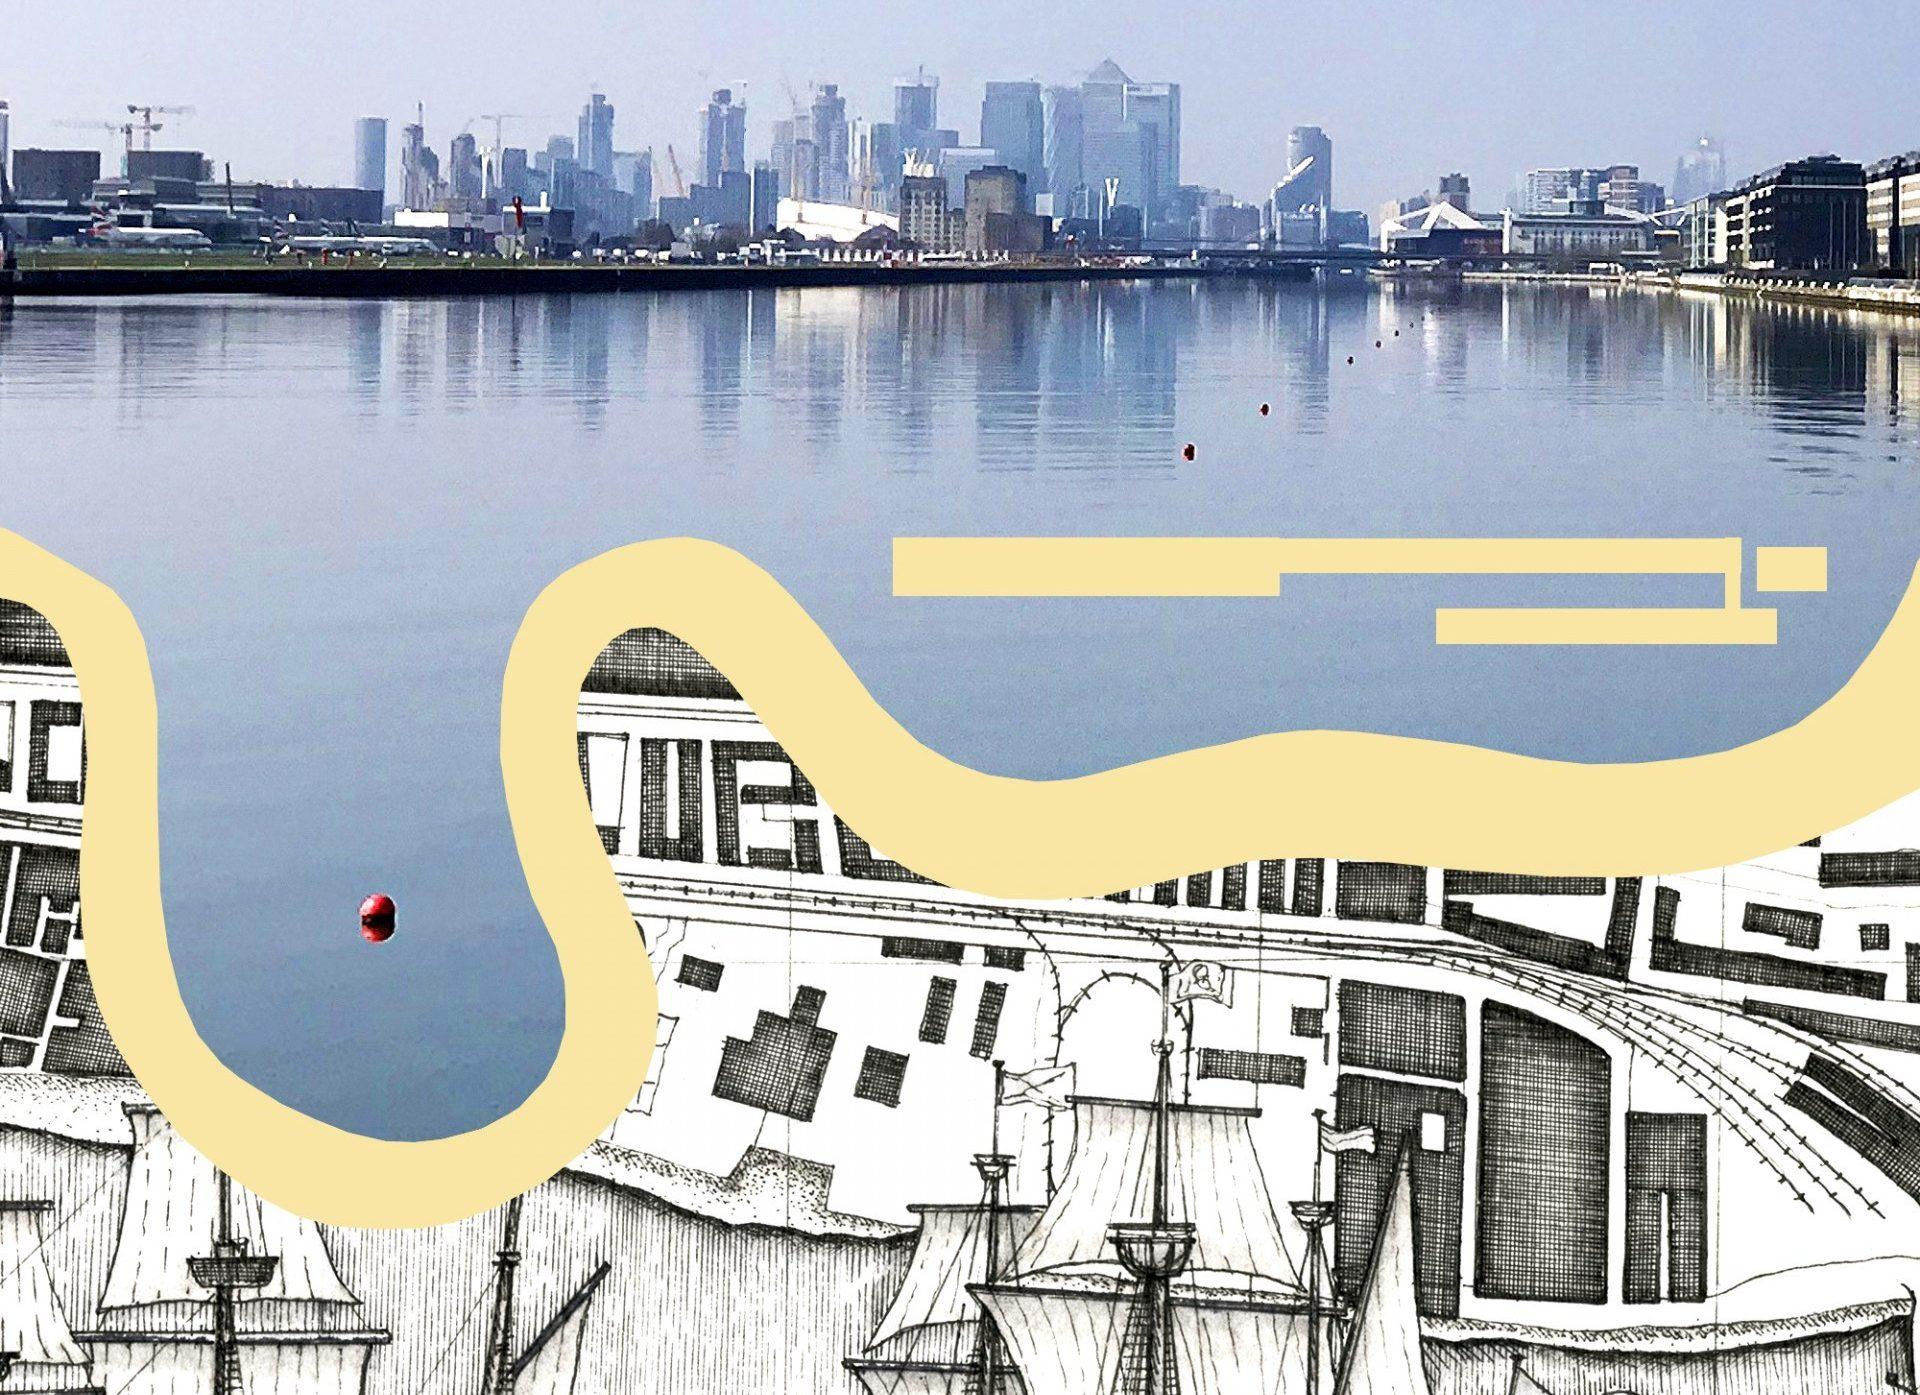 An image of the docks with Canary Wharf in the background. Underneath is an illustration of the Thames